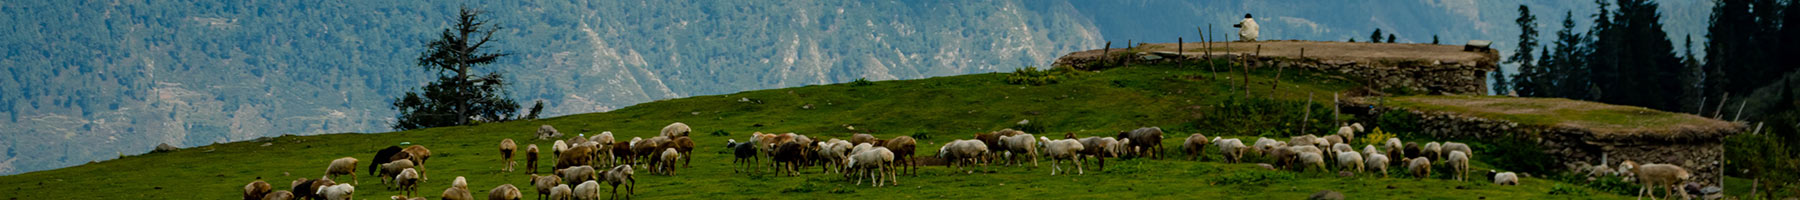 a flock of sheep on a mountainside